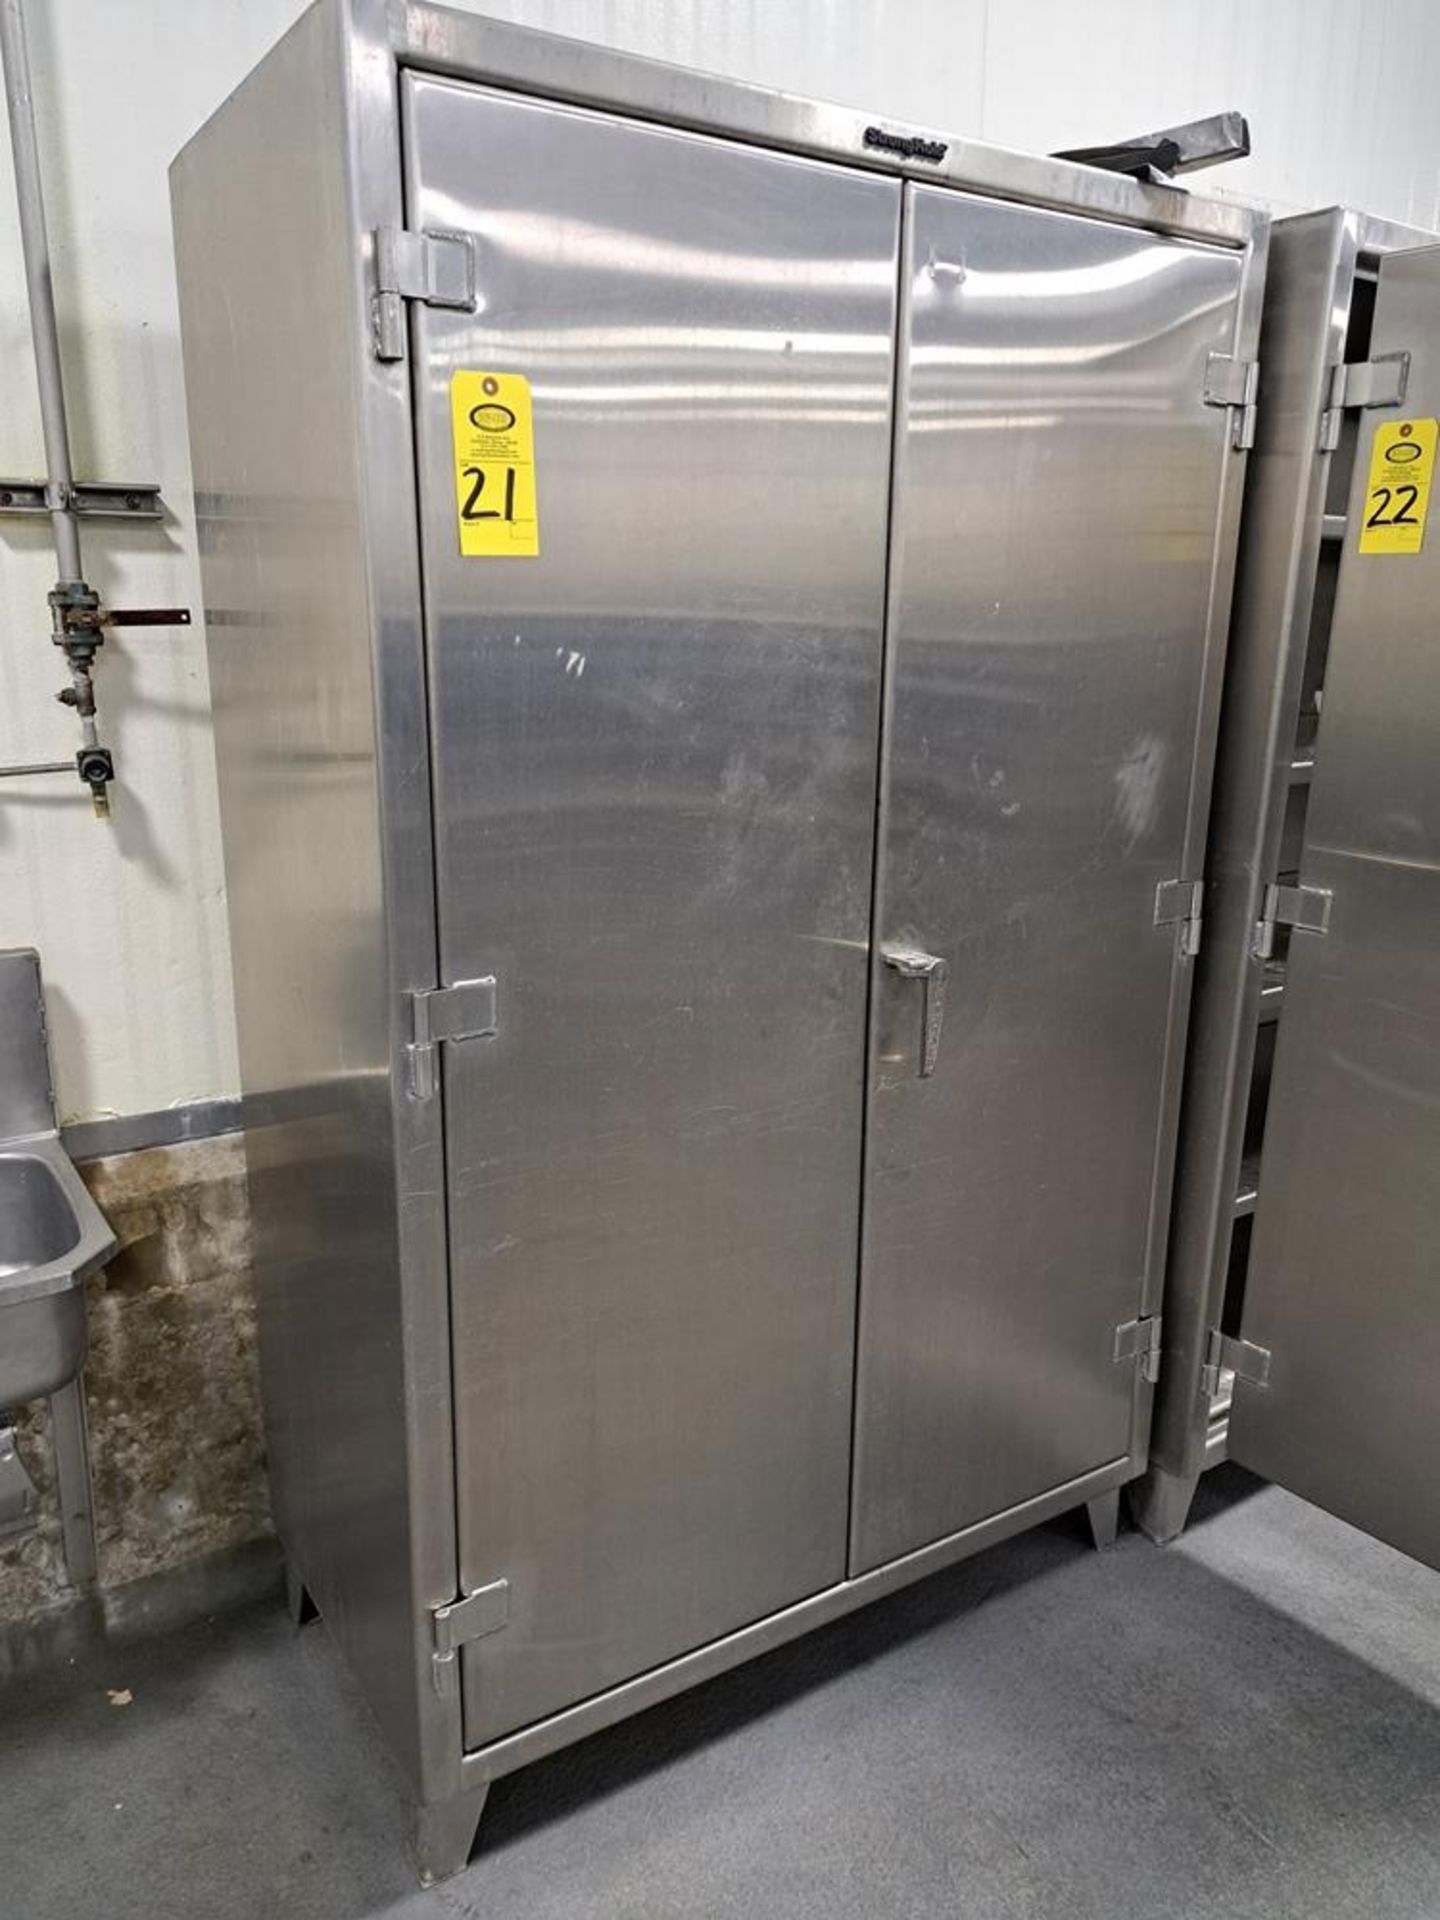 Stronghold Stainless Steel Cabinet, 48" W X 22" D X 78" T, 5-shelves: Required Loading Fee $75.00,